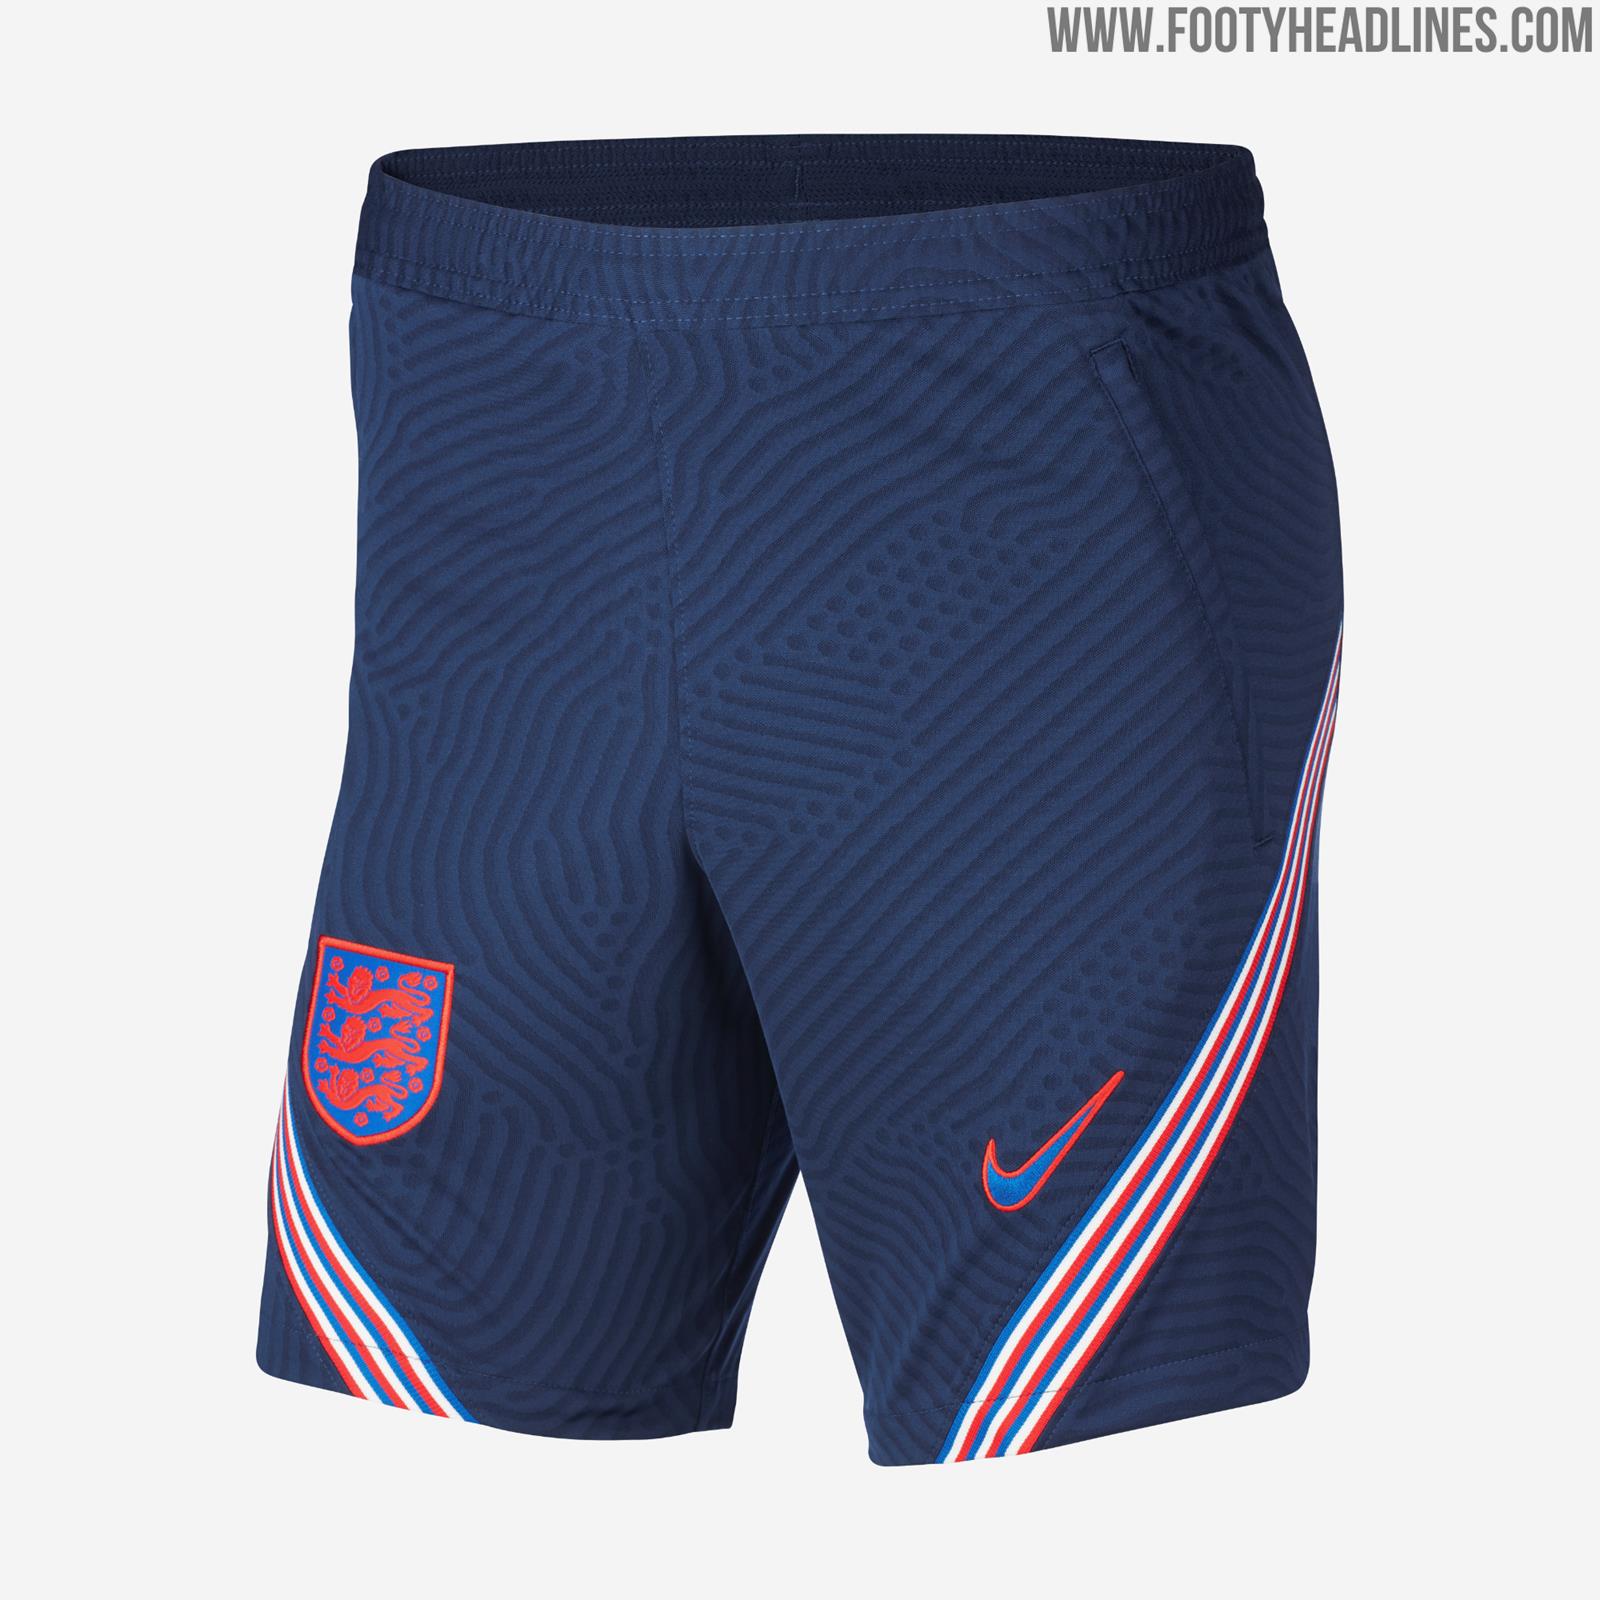 Stunning Nike England Euro 2020 Training Kit + Collection Released ...